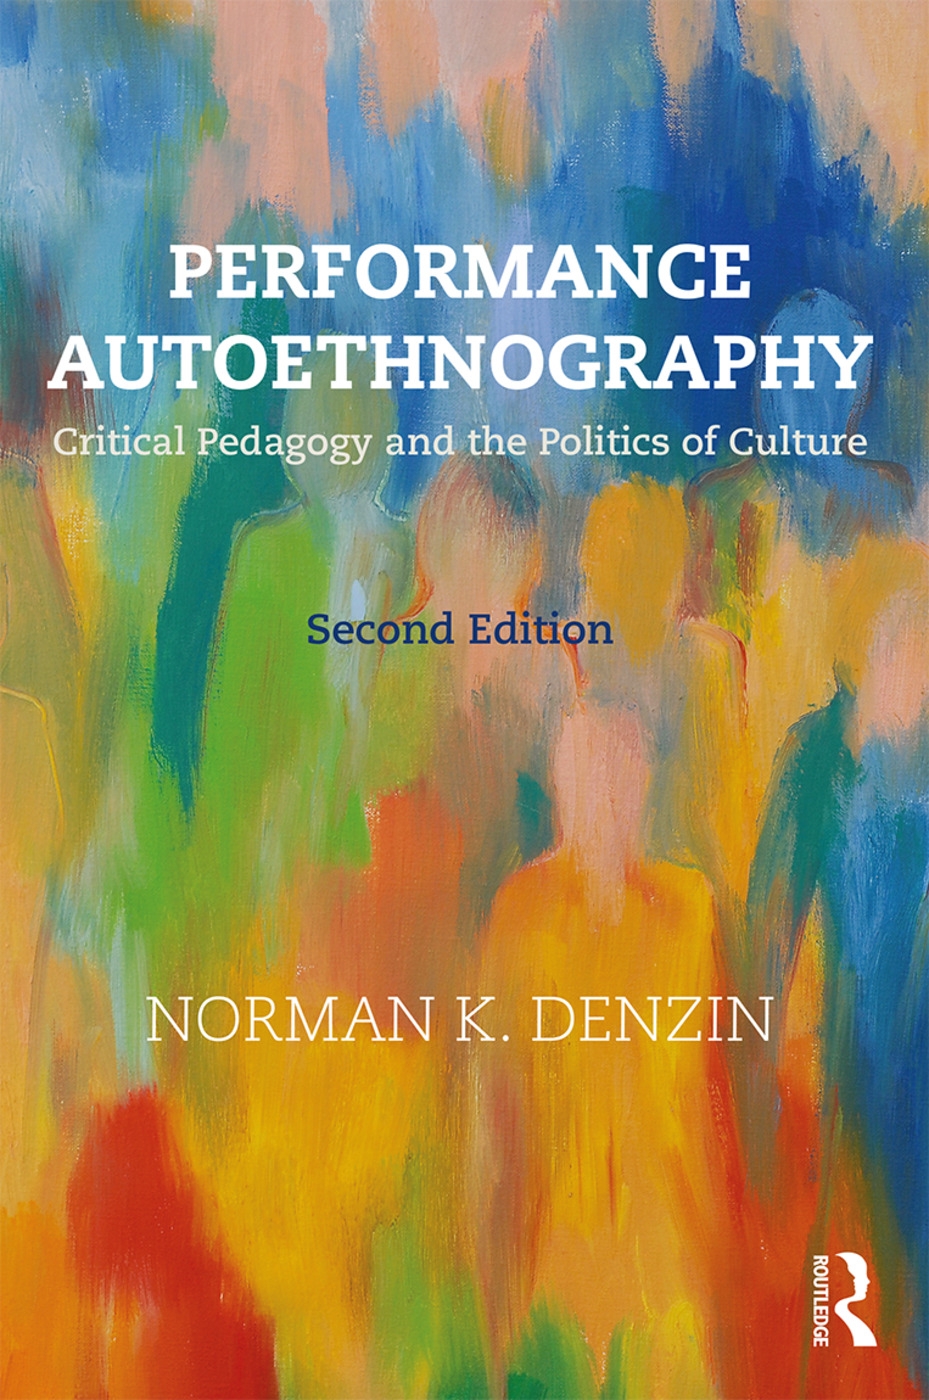 Performance Autoethnography: Critical Pedagogy and the Politics of Culture